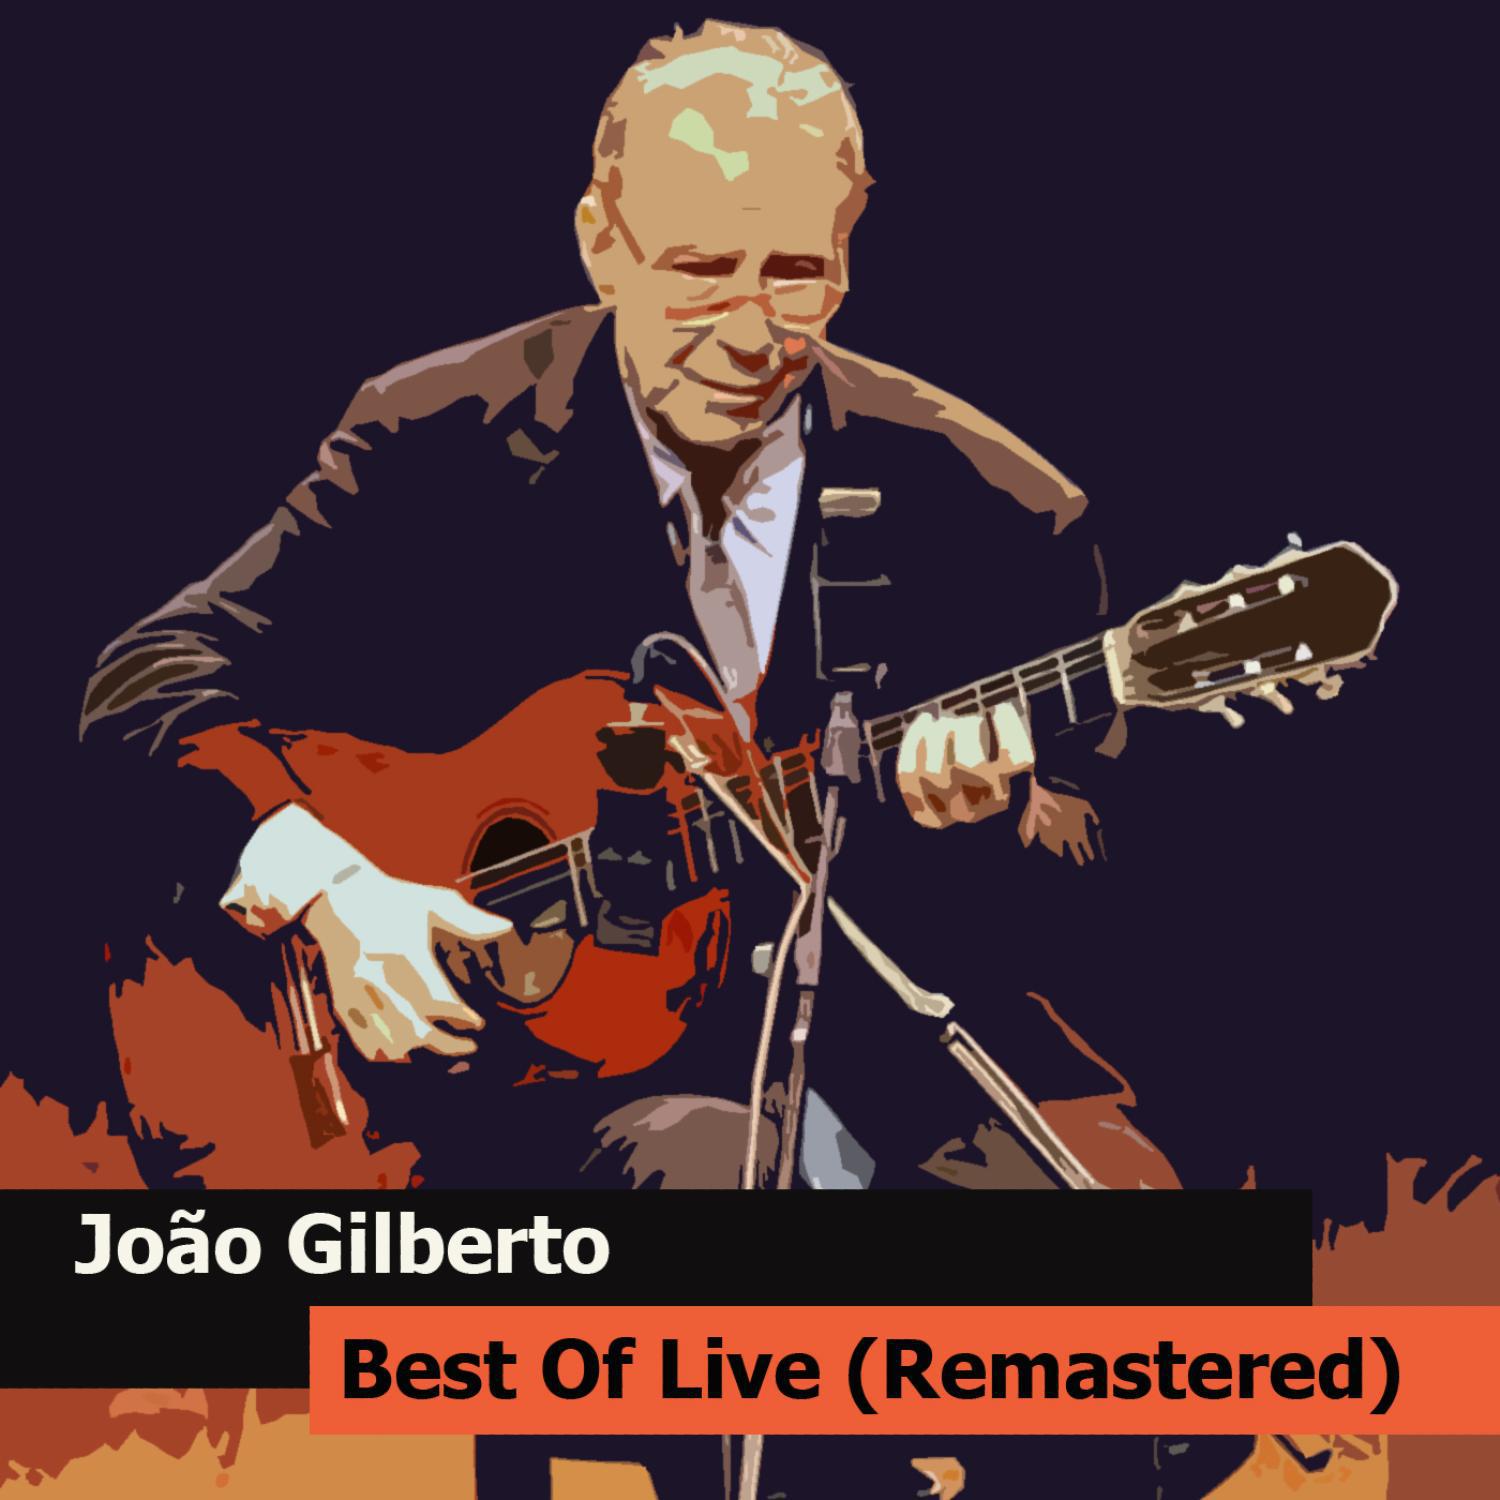 Jo o Gilberto Best Of Live Remastered